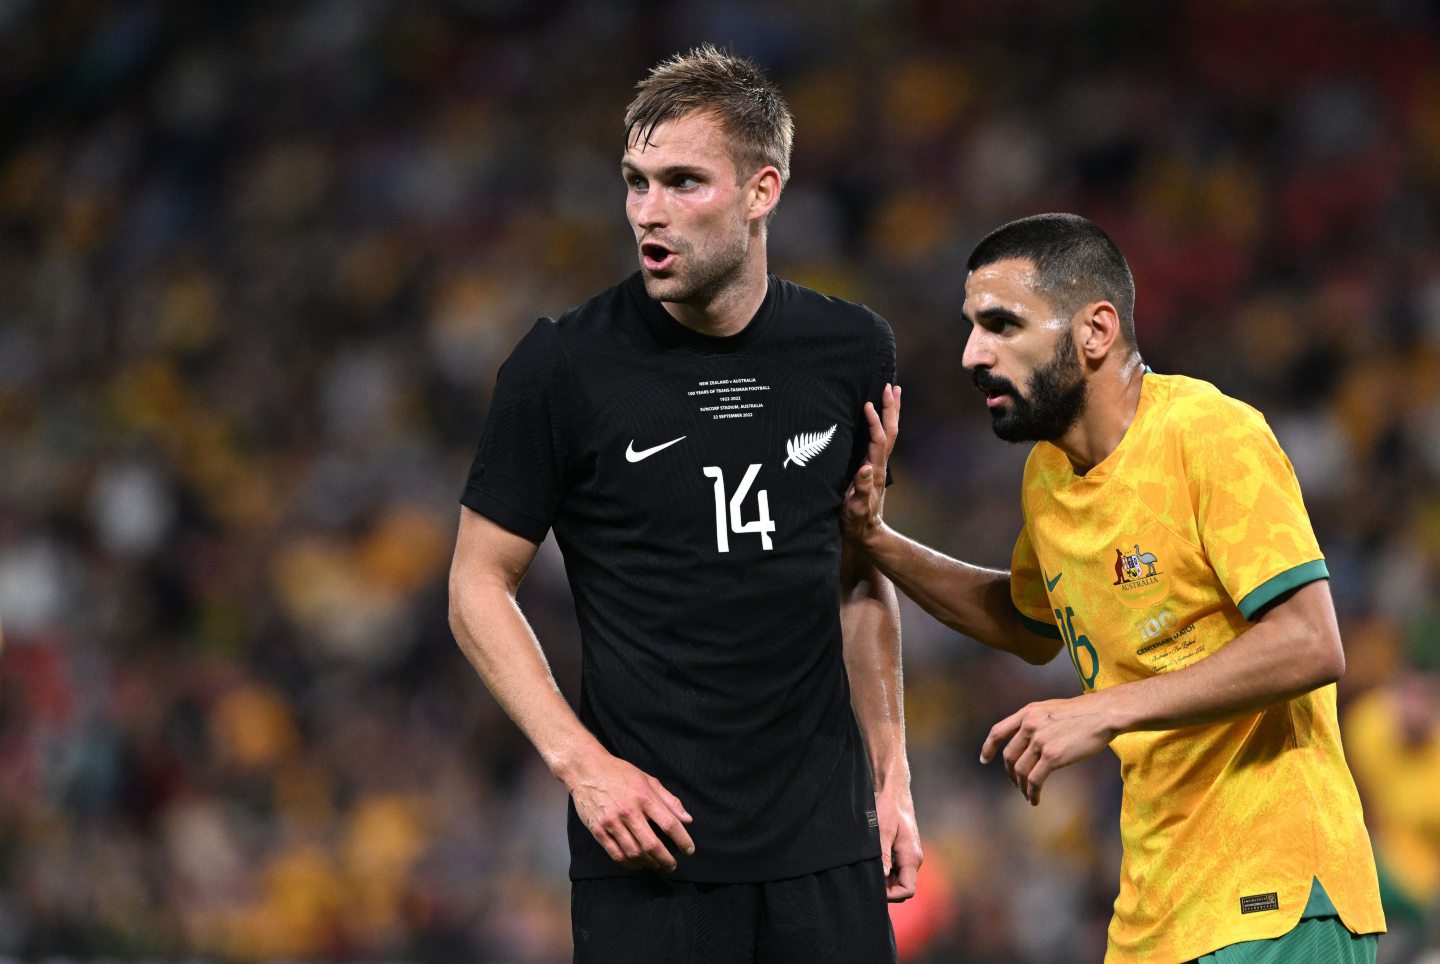 Behich pictured for Australia against New Zealand in their friendly last month. Image: Shutterstock